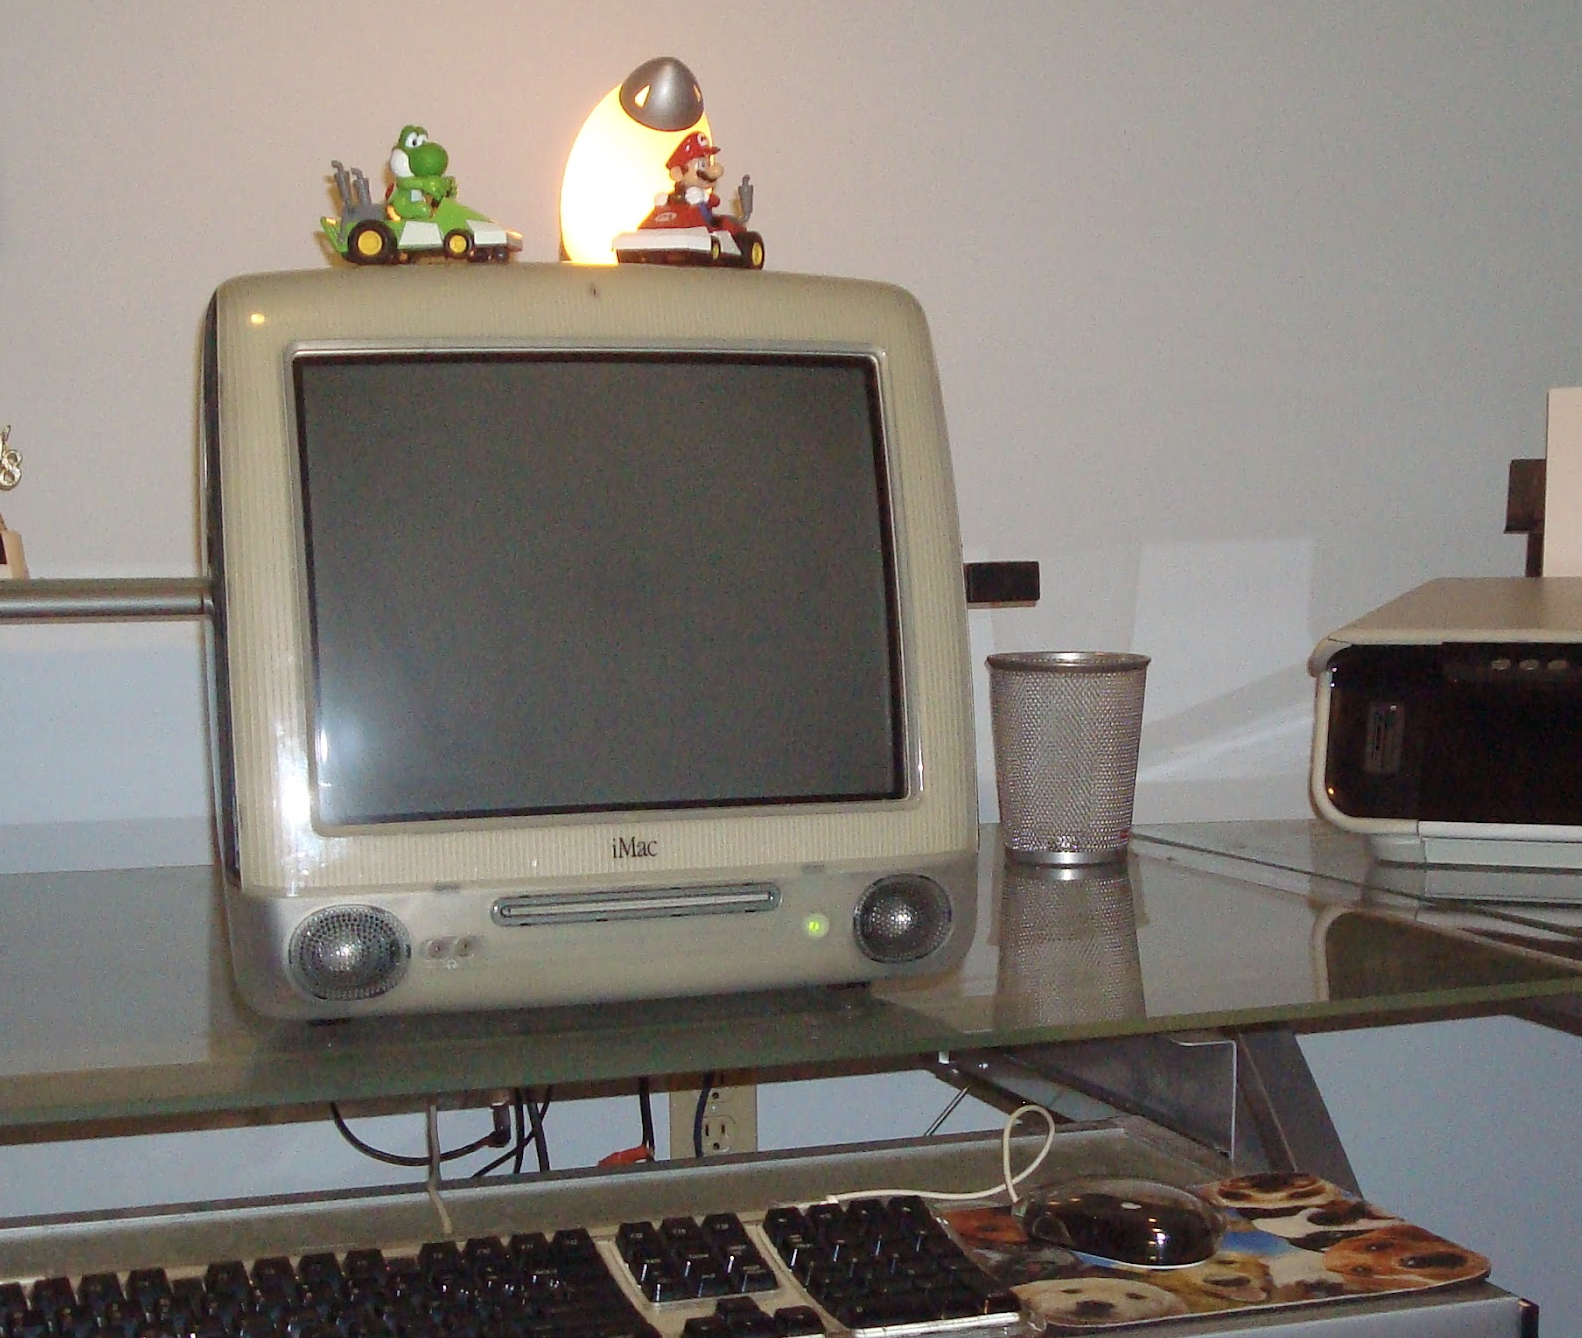 My iMac in 2009 in all its glory